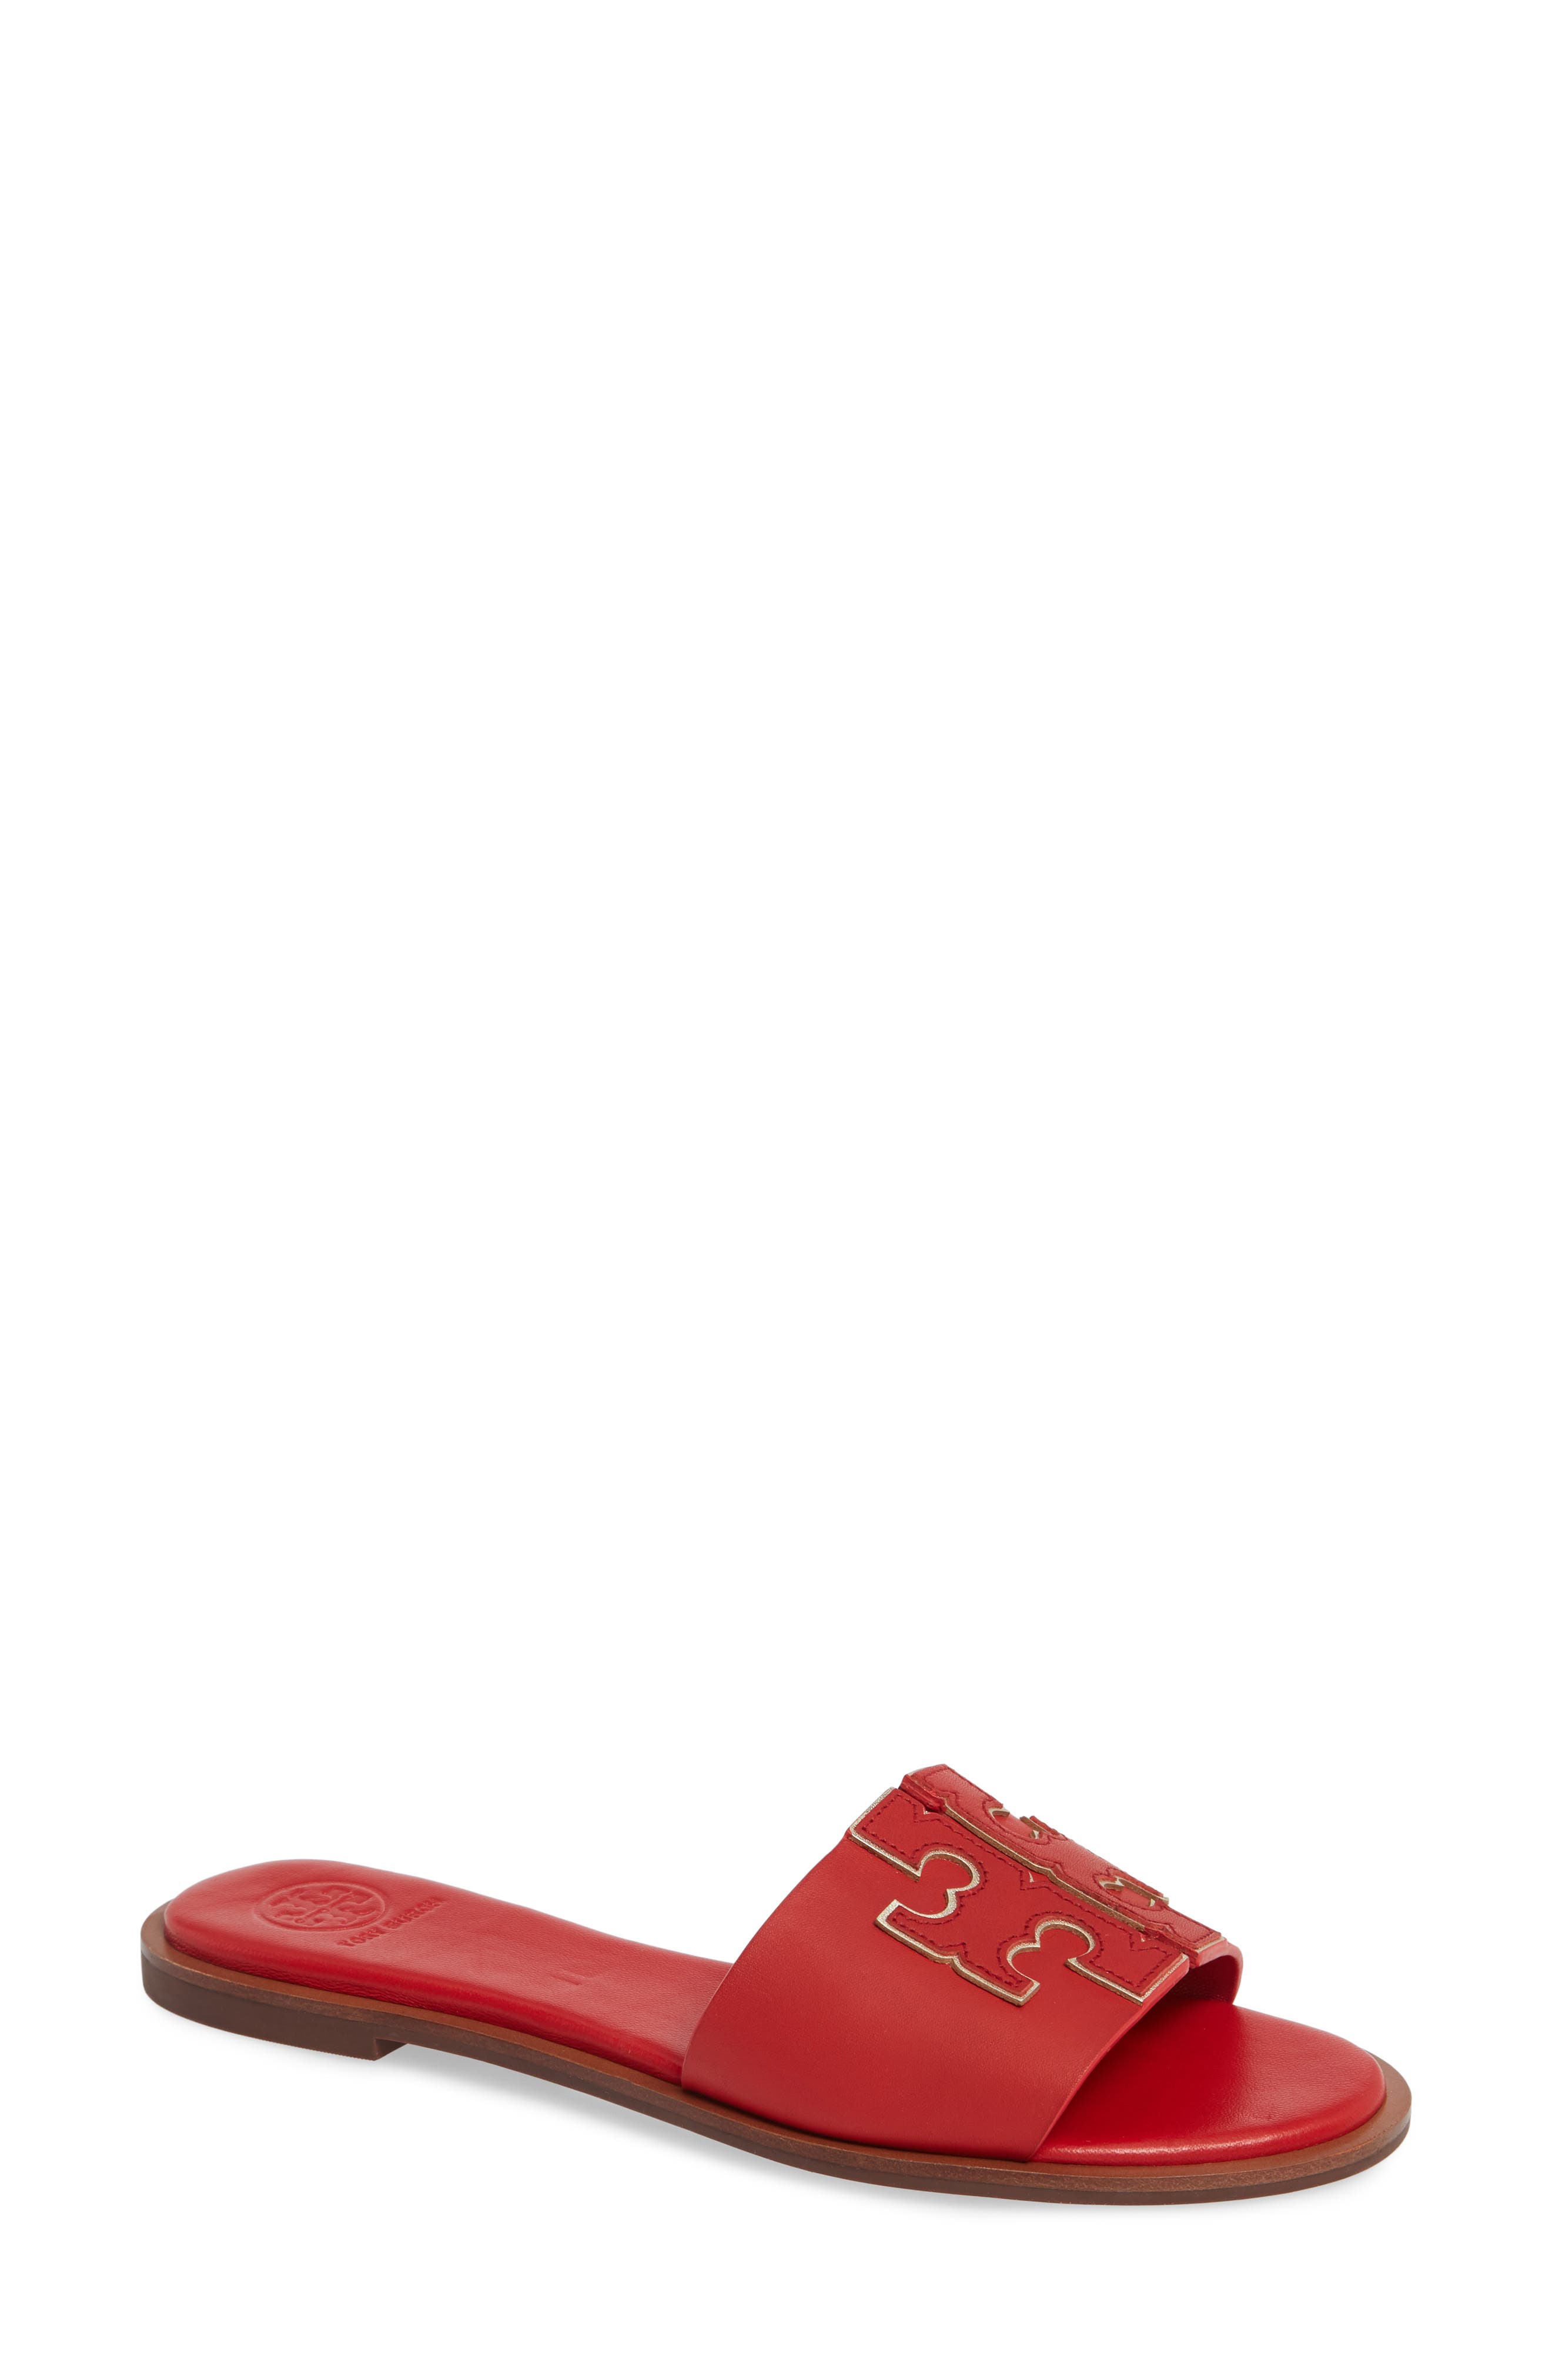 tory burch slides red